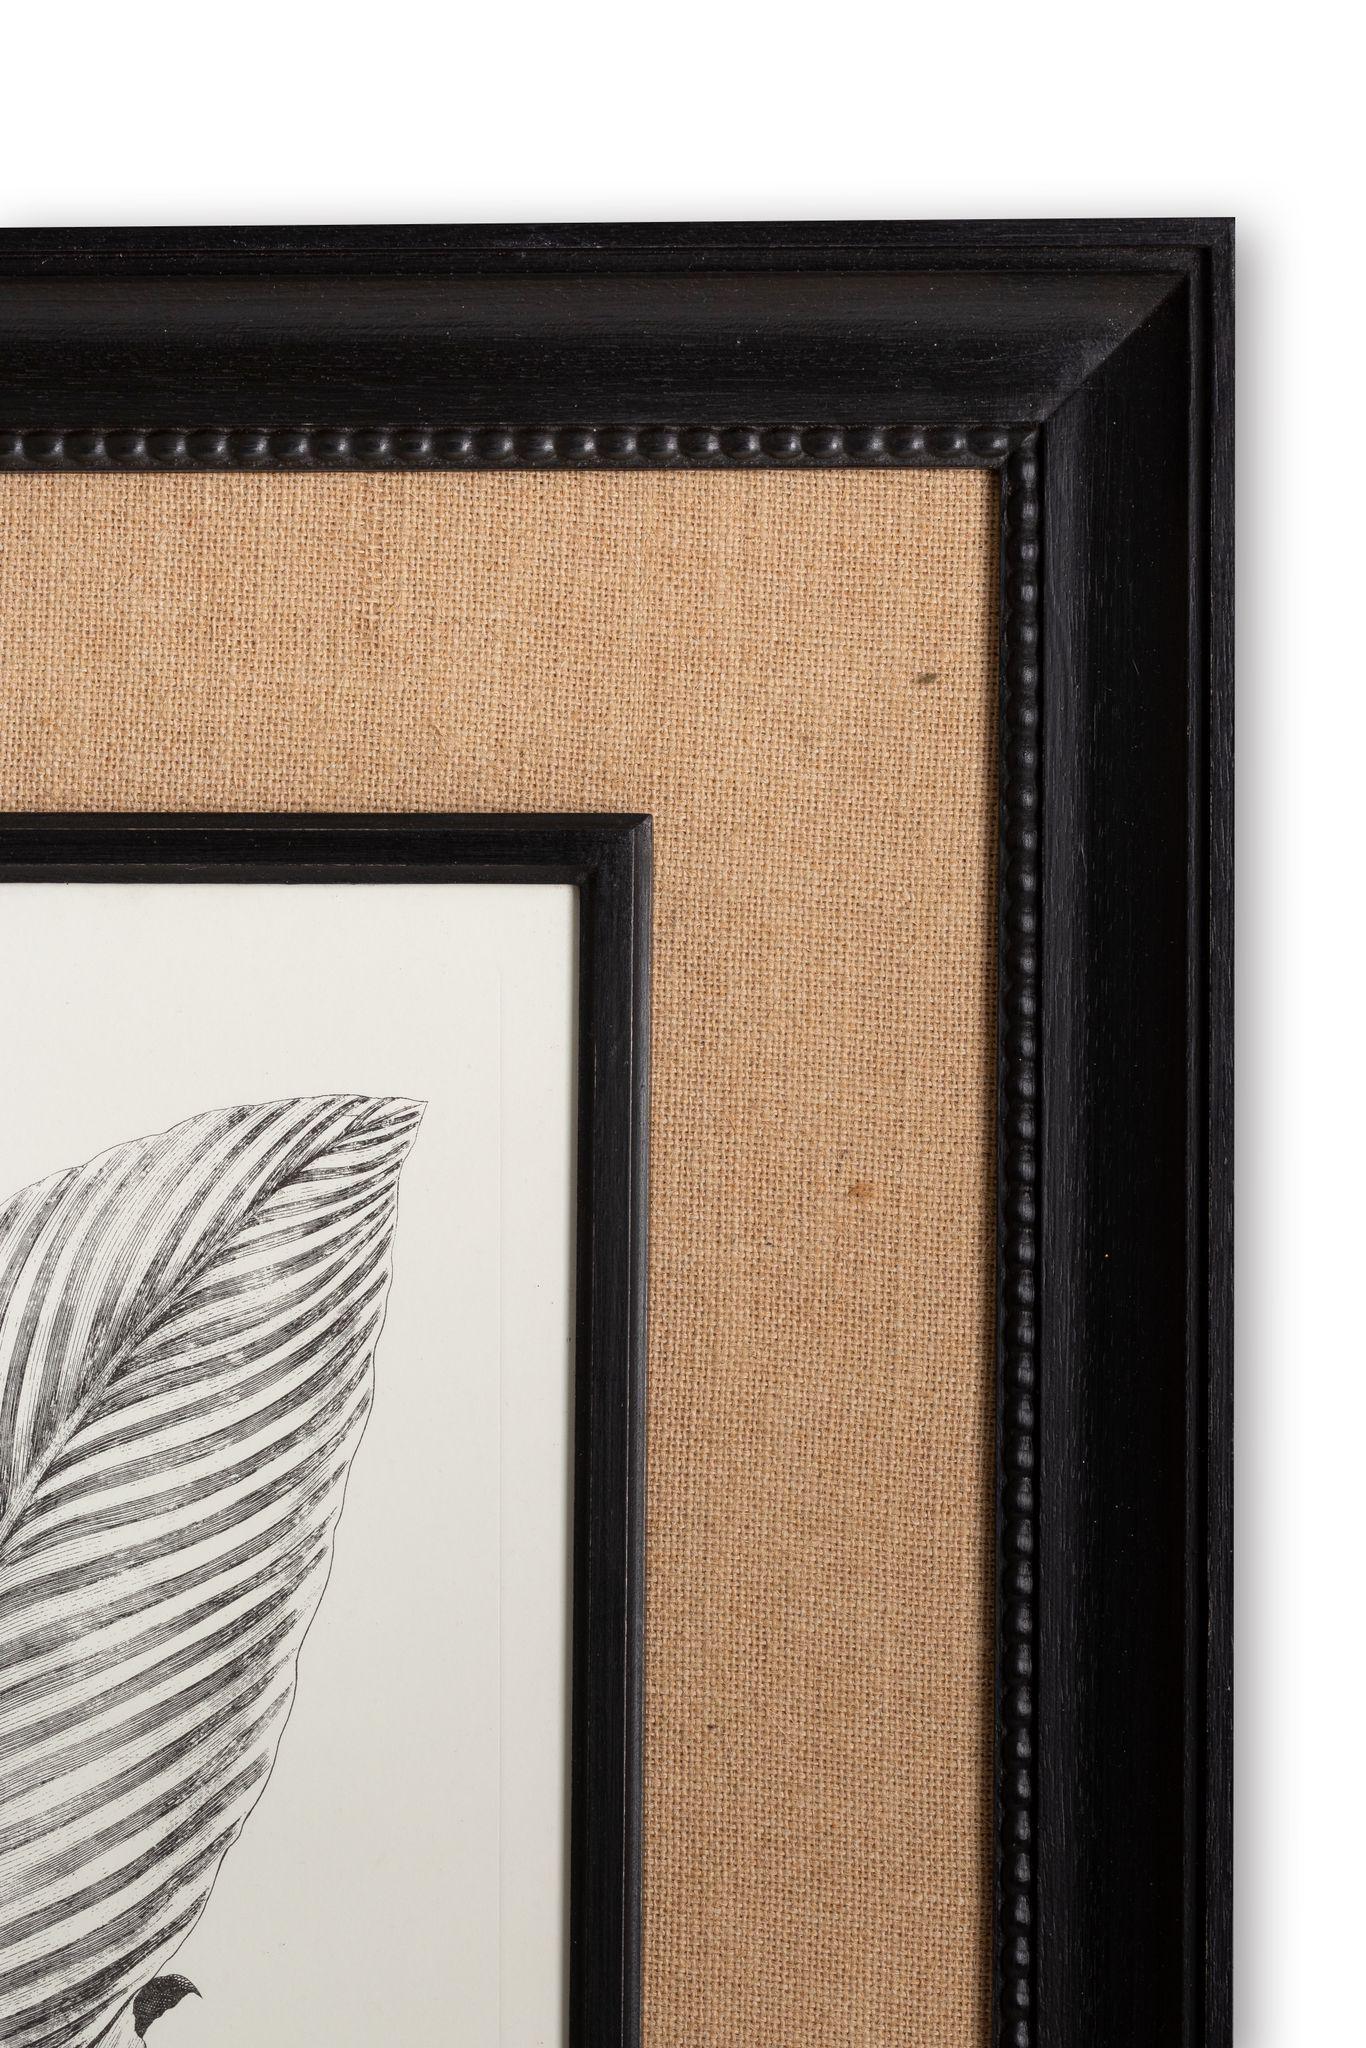 Print from the Collection Botanique Black and White representing Canna Indica, with a beautiful wooden frame enriched with a jute passpartout, which brings out colors and sumatute of watercolor colors.

Collection of two: 
- Aloe Americana
- Canna